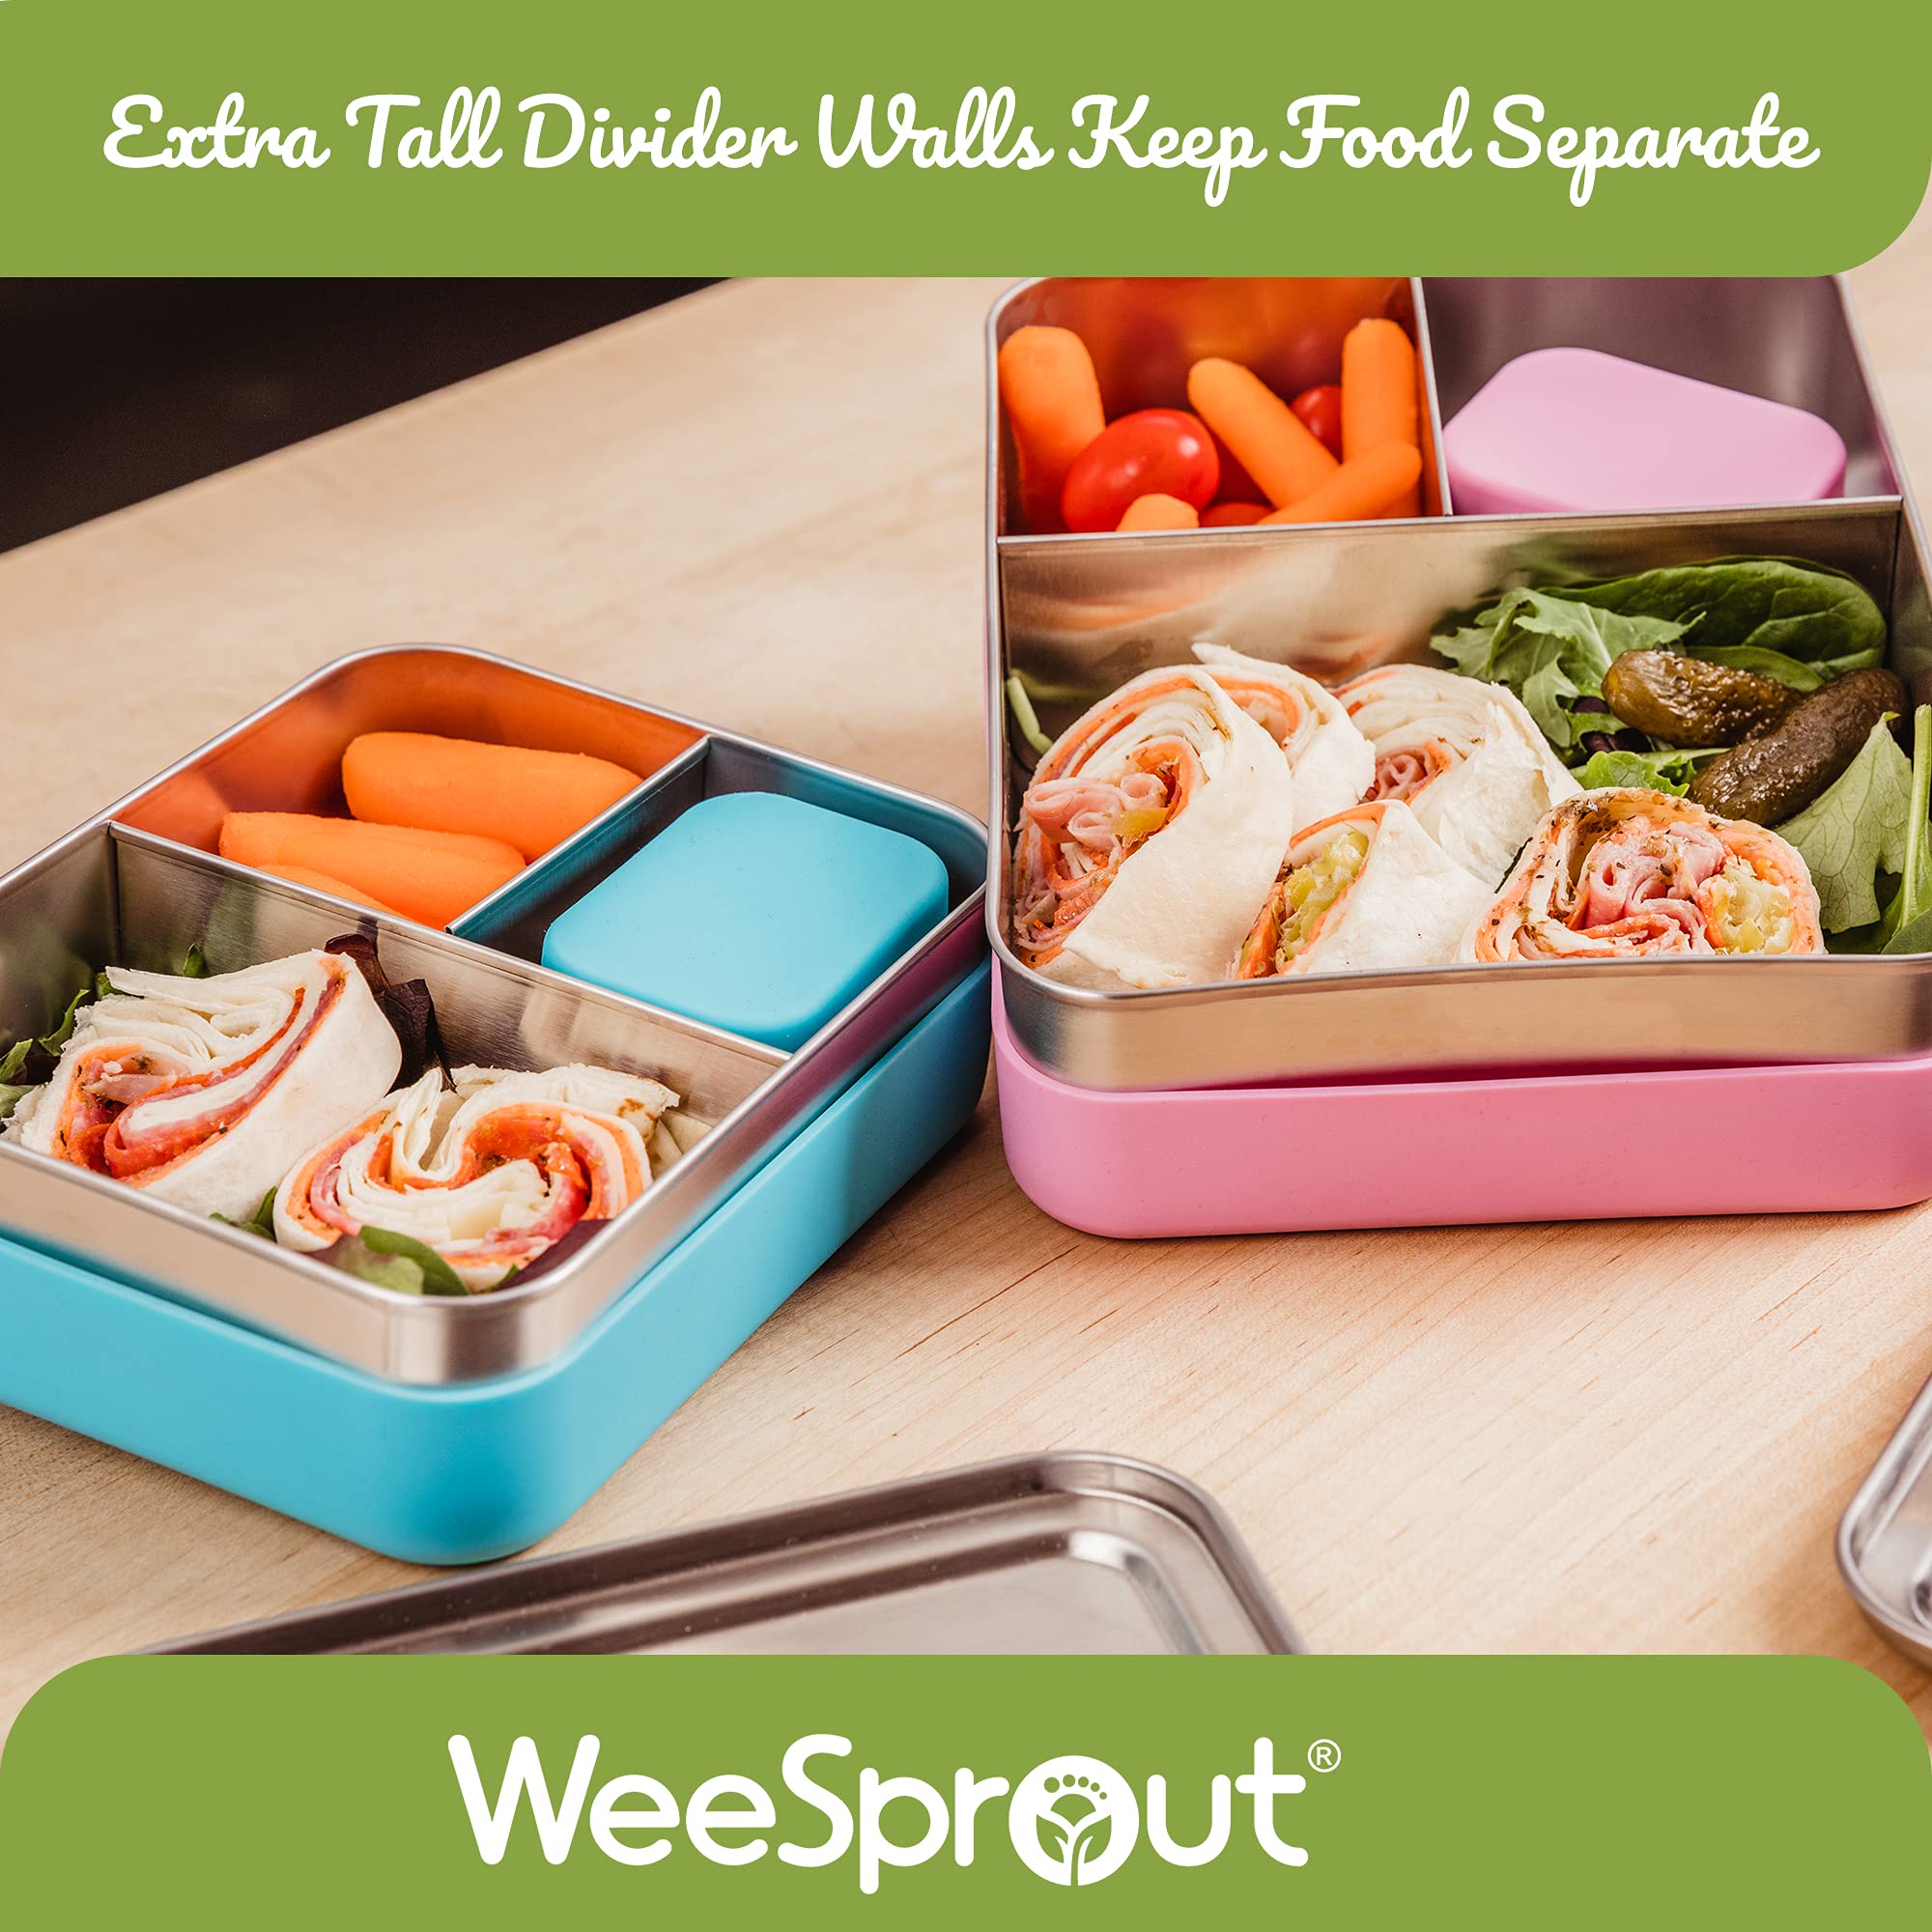 WeeSprout 18/8 Stainless Steel Bento Box (Compact Lunch Box) - 3 Compartment Metal Lunch Containers, for Kids & Adults, Bonus Dip Container, Fits in Lunch Bag & Backpack